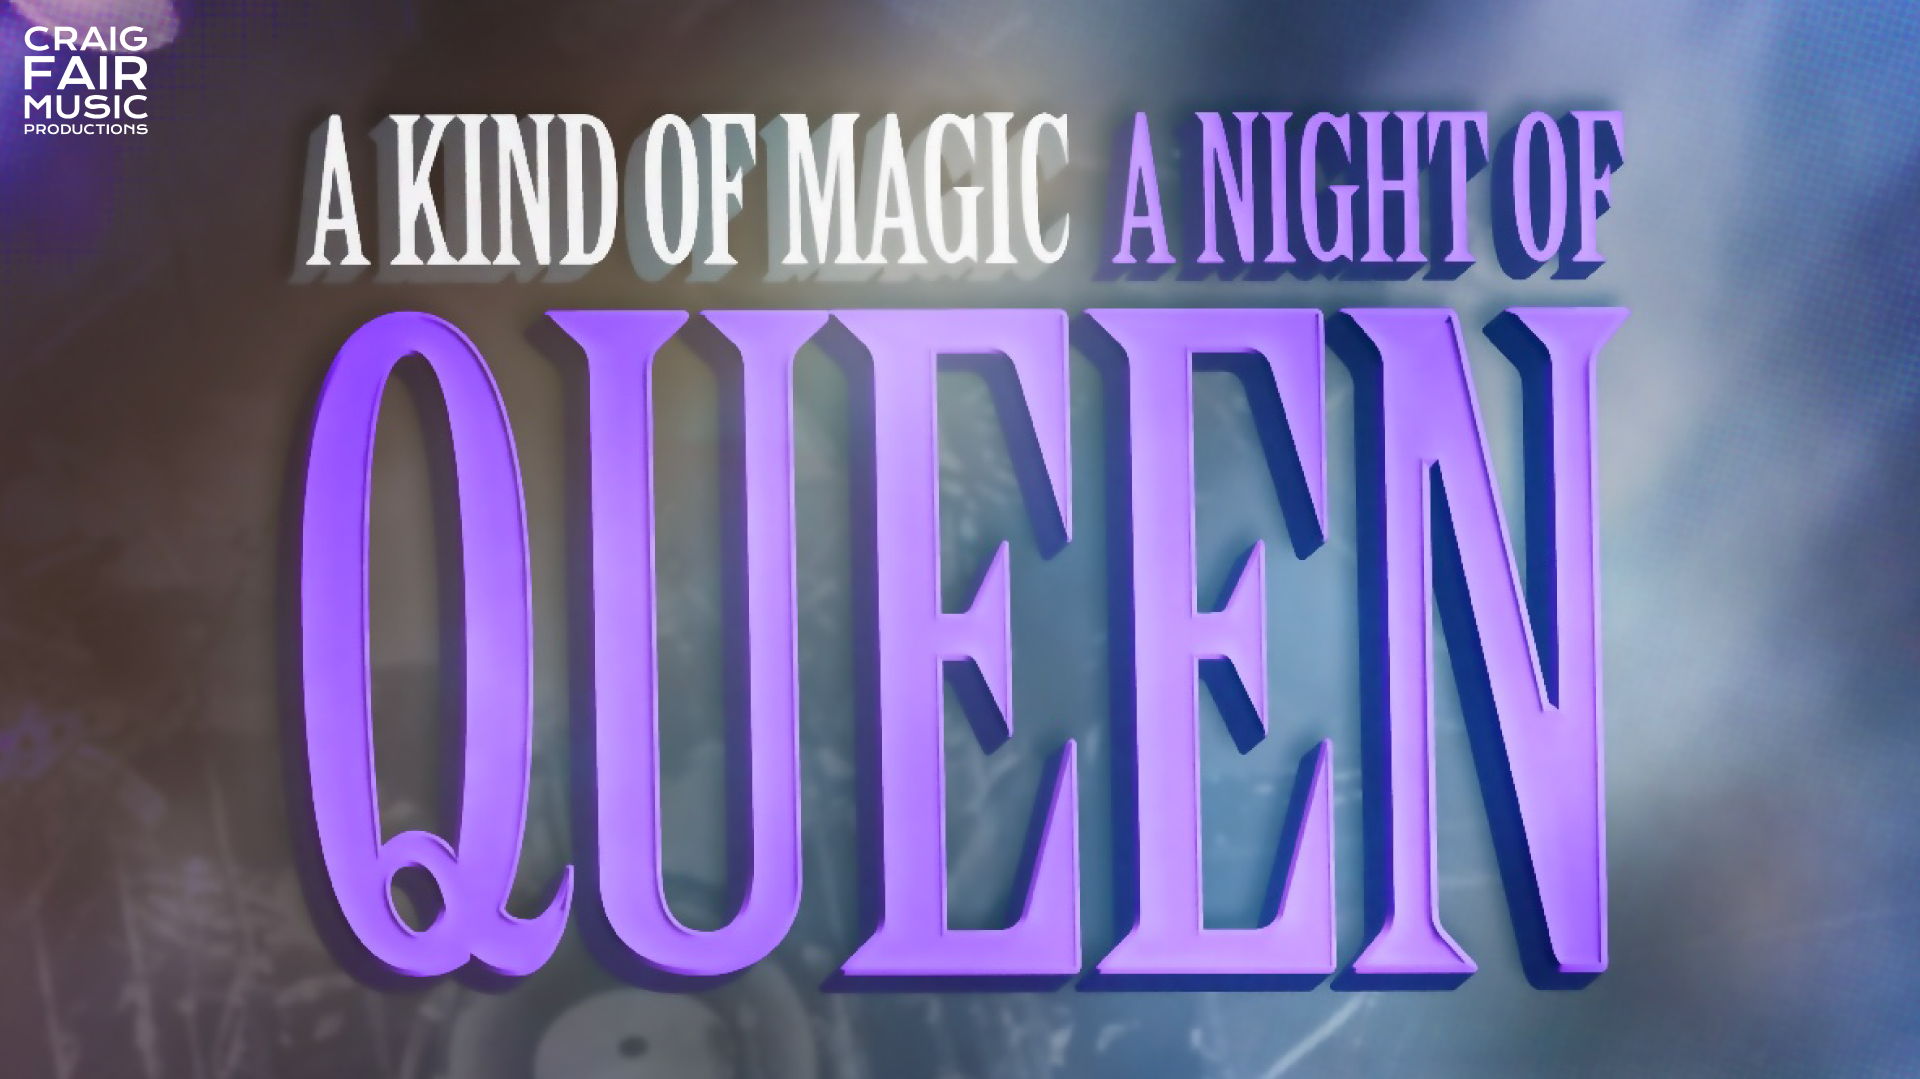 A Kind Of Magic: A Night of QUEEN! - August 2nd - $55 - Doors 6:30 PM